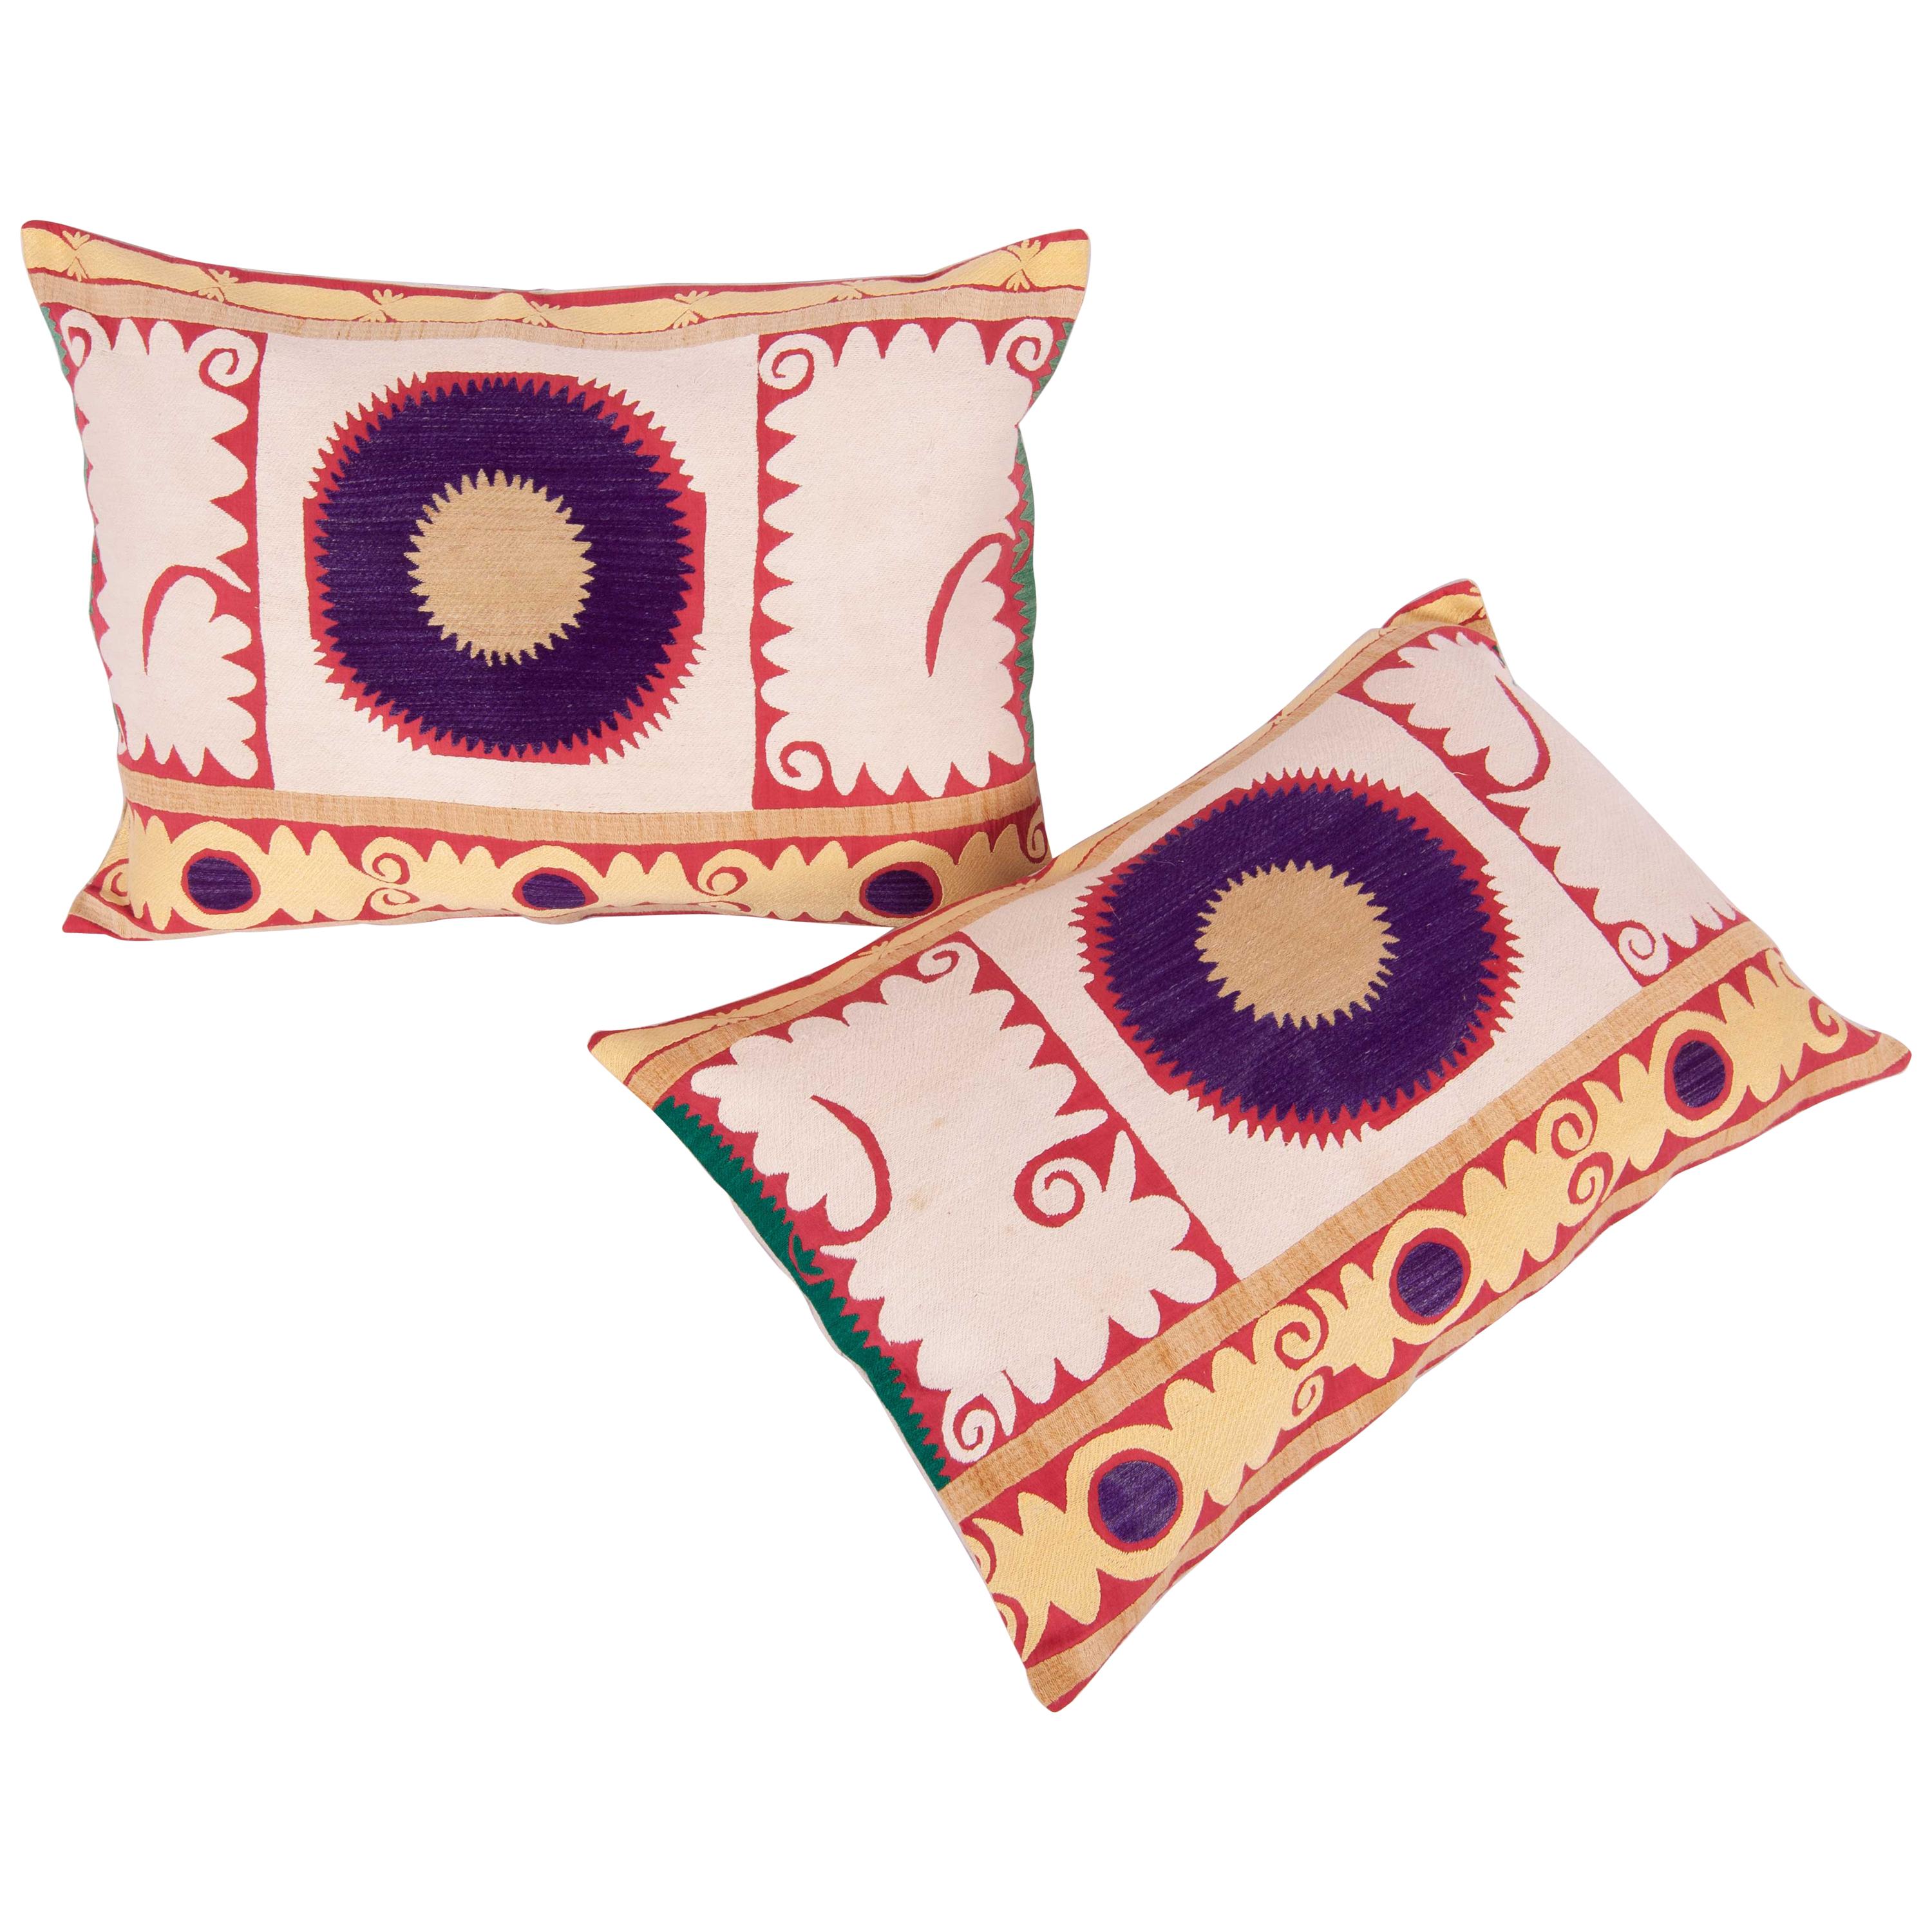 Pillow or Cushion Cases Fashioned from a Midcentury Suzani